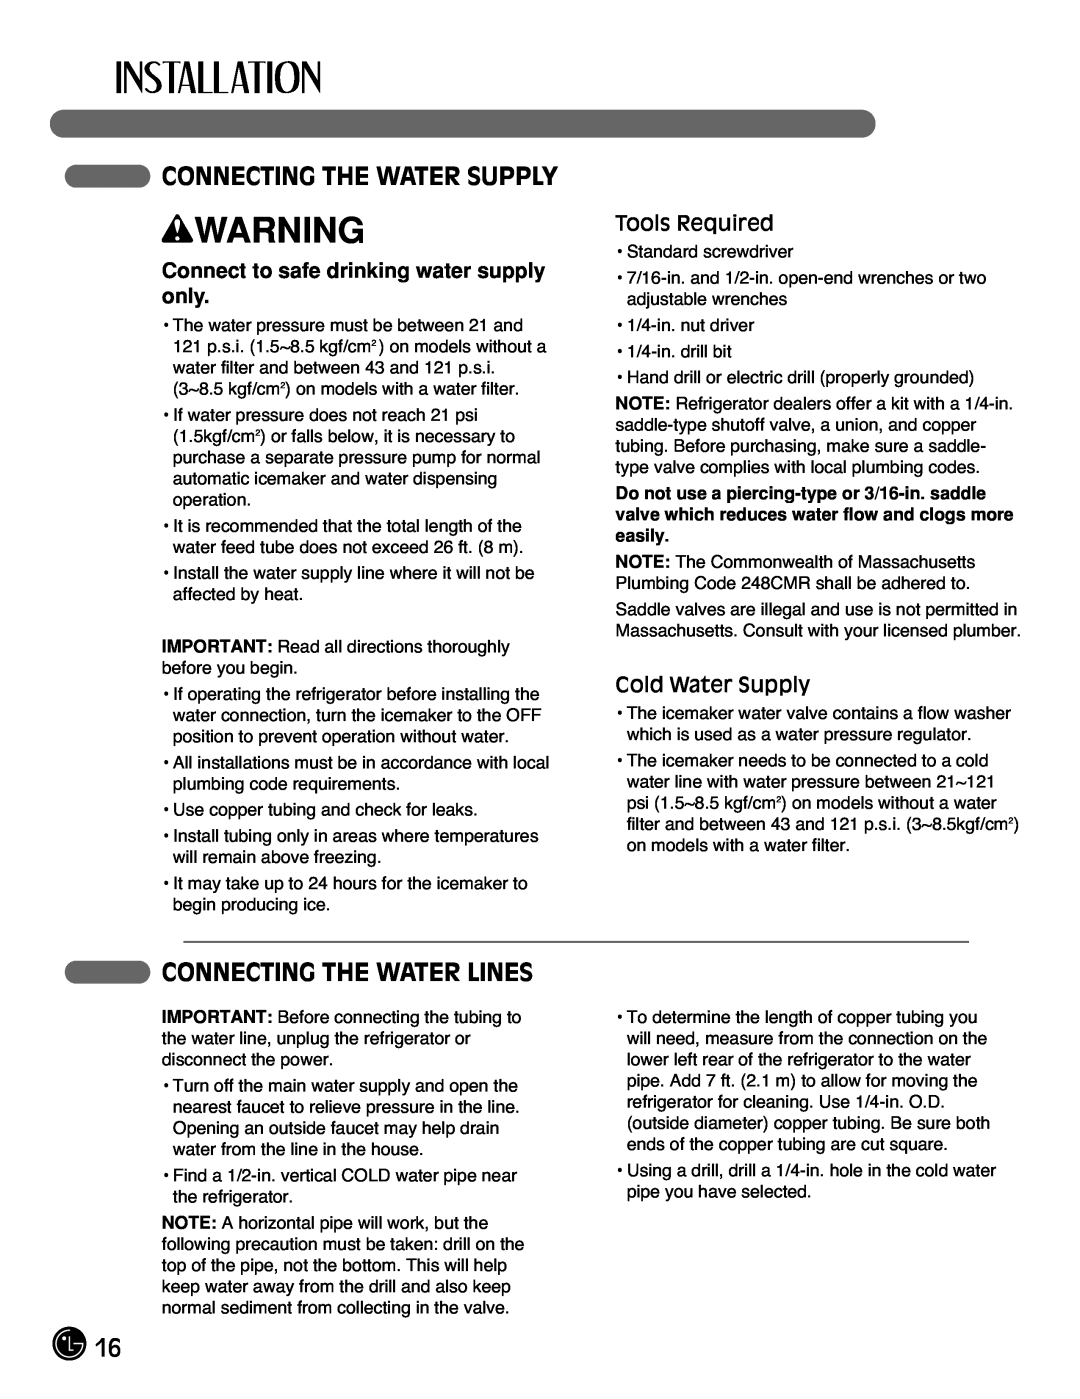 LG Electronics LFX21971** manual Connecting The Water Supply, Connecting The Water Lines, Tools Required, Cold Water Supply 